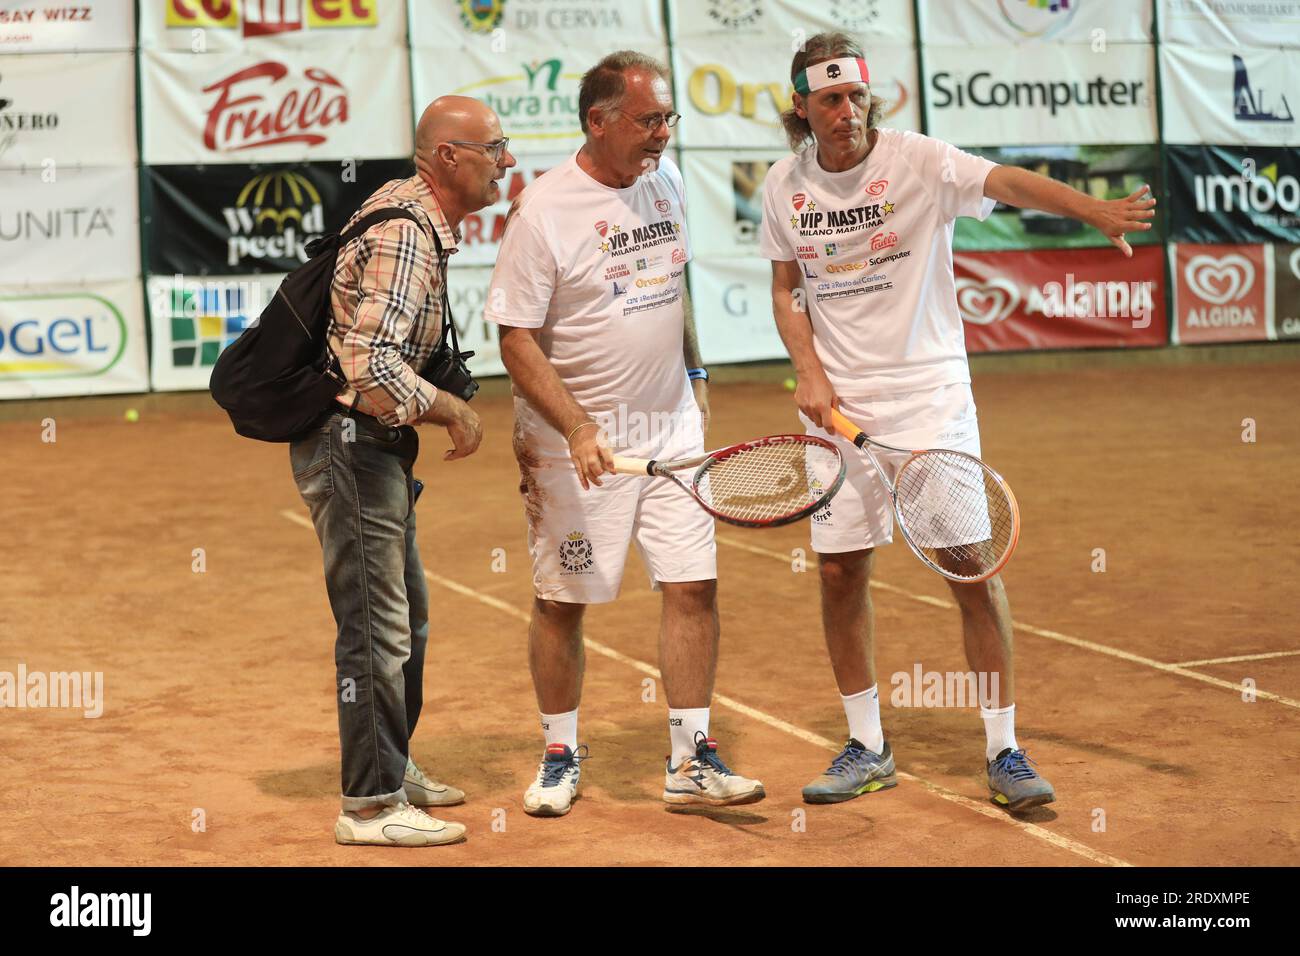 Maritime Milan, Italy. 22nd July, 2023. Milano Marittima (RA), Vip Master tennis  tournament. In the photo: Alessandro Cecchi Paone falls and is injured  Credit: Independent Photo Agency/Alamy Live News Stock Photo -